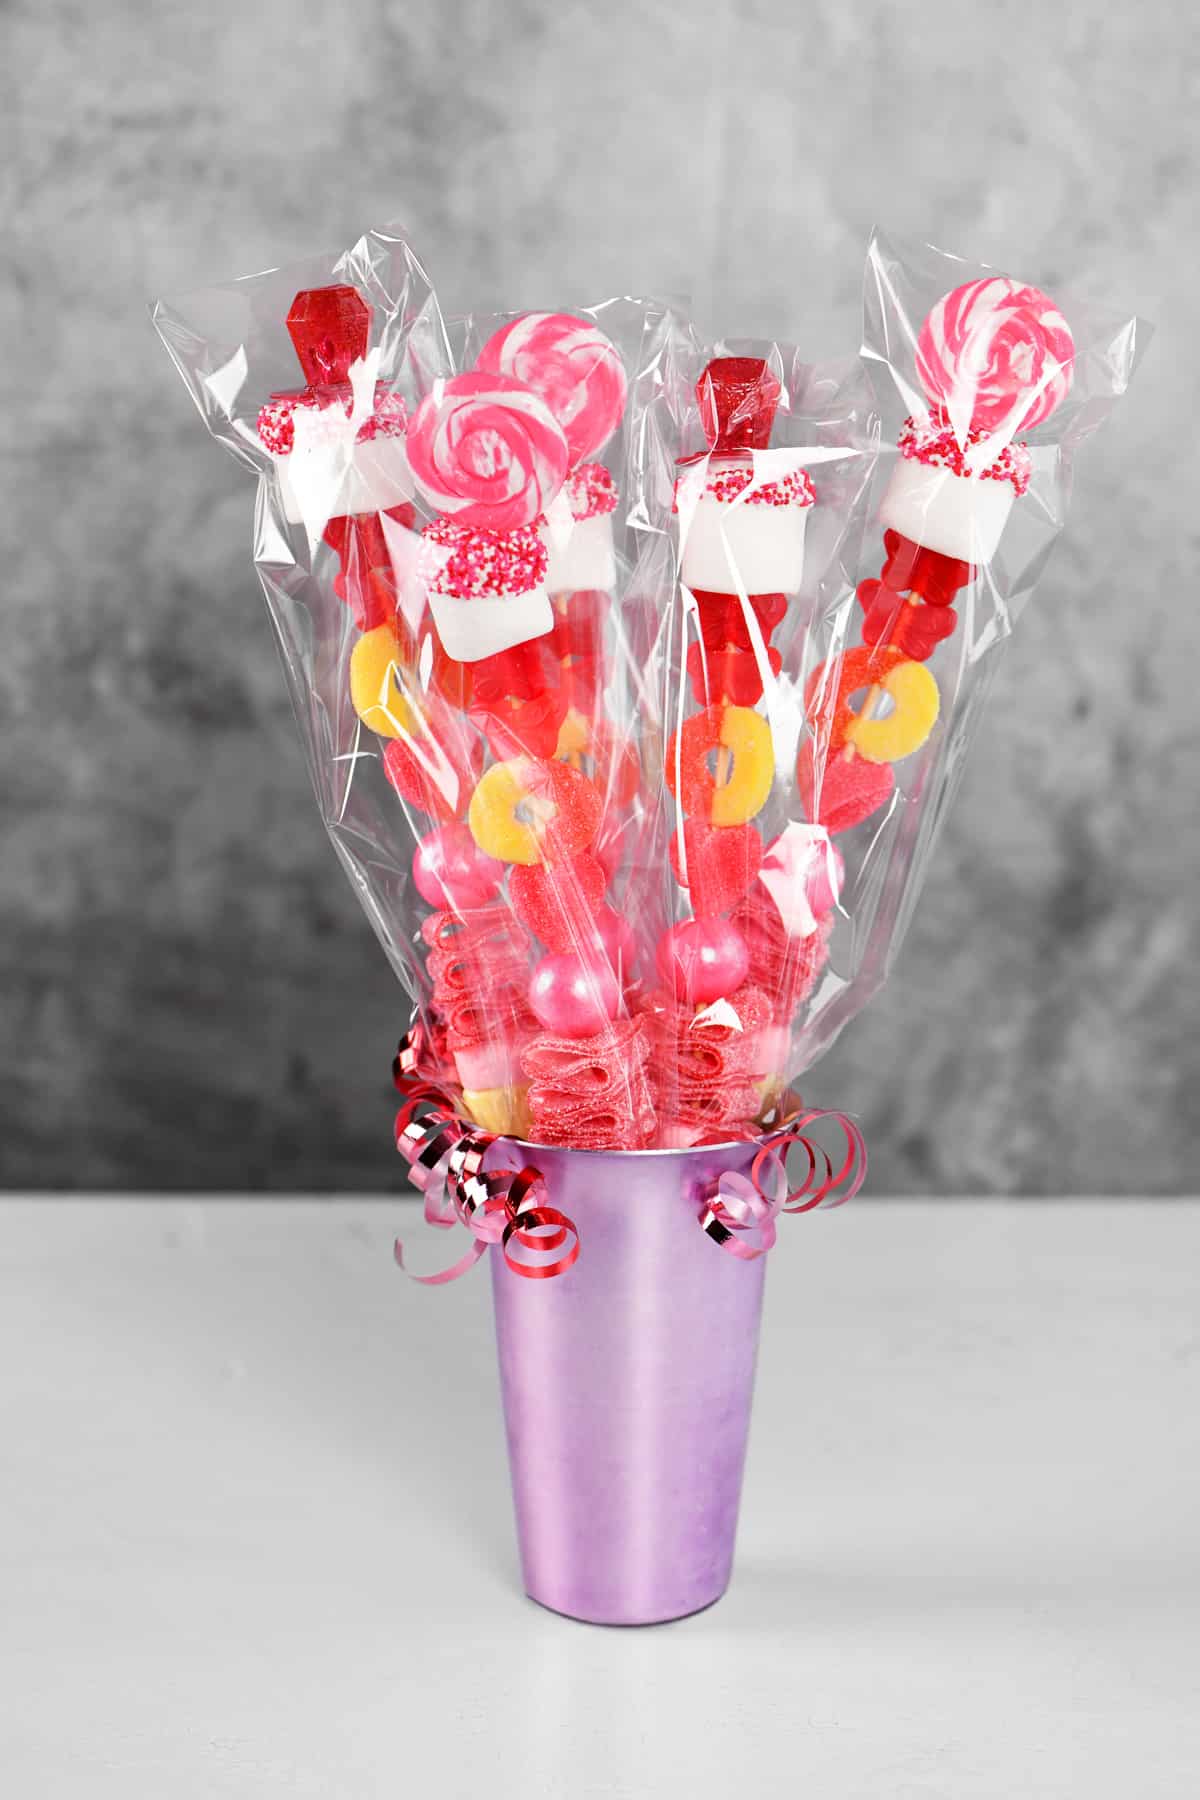 a lavender colored aluminum cup with candy sticks inside.